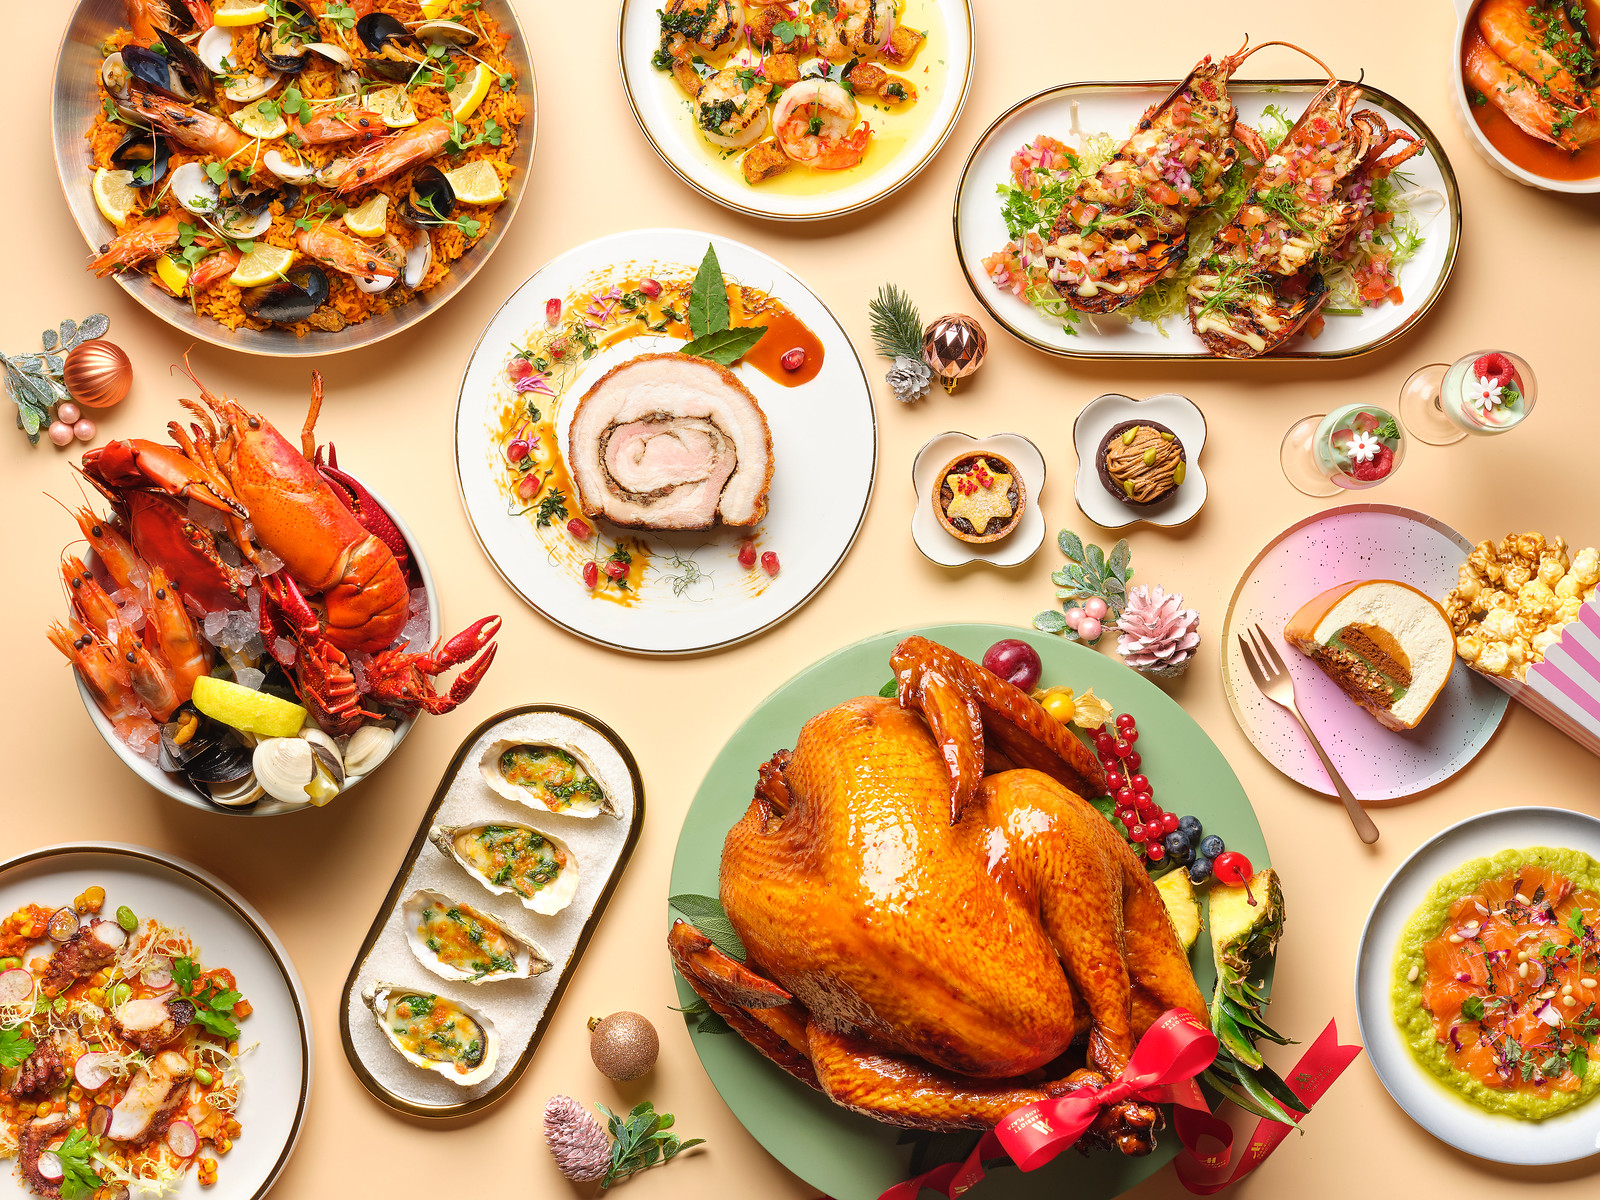 12 Singapore Marriott Tang Plaza Hotel- A Yuletide Gastronomy of Scrumptious Seafood at Crossroads Buffet